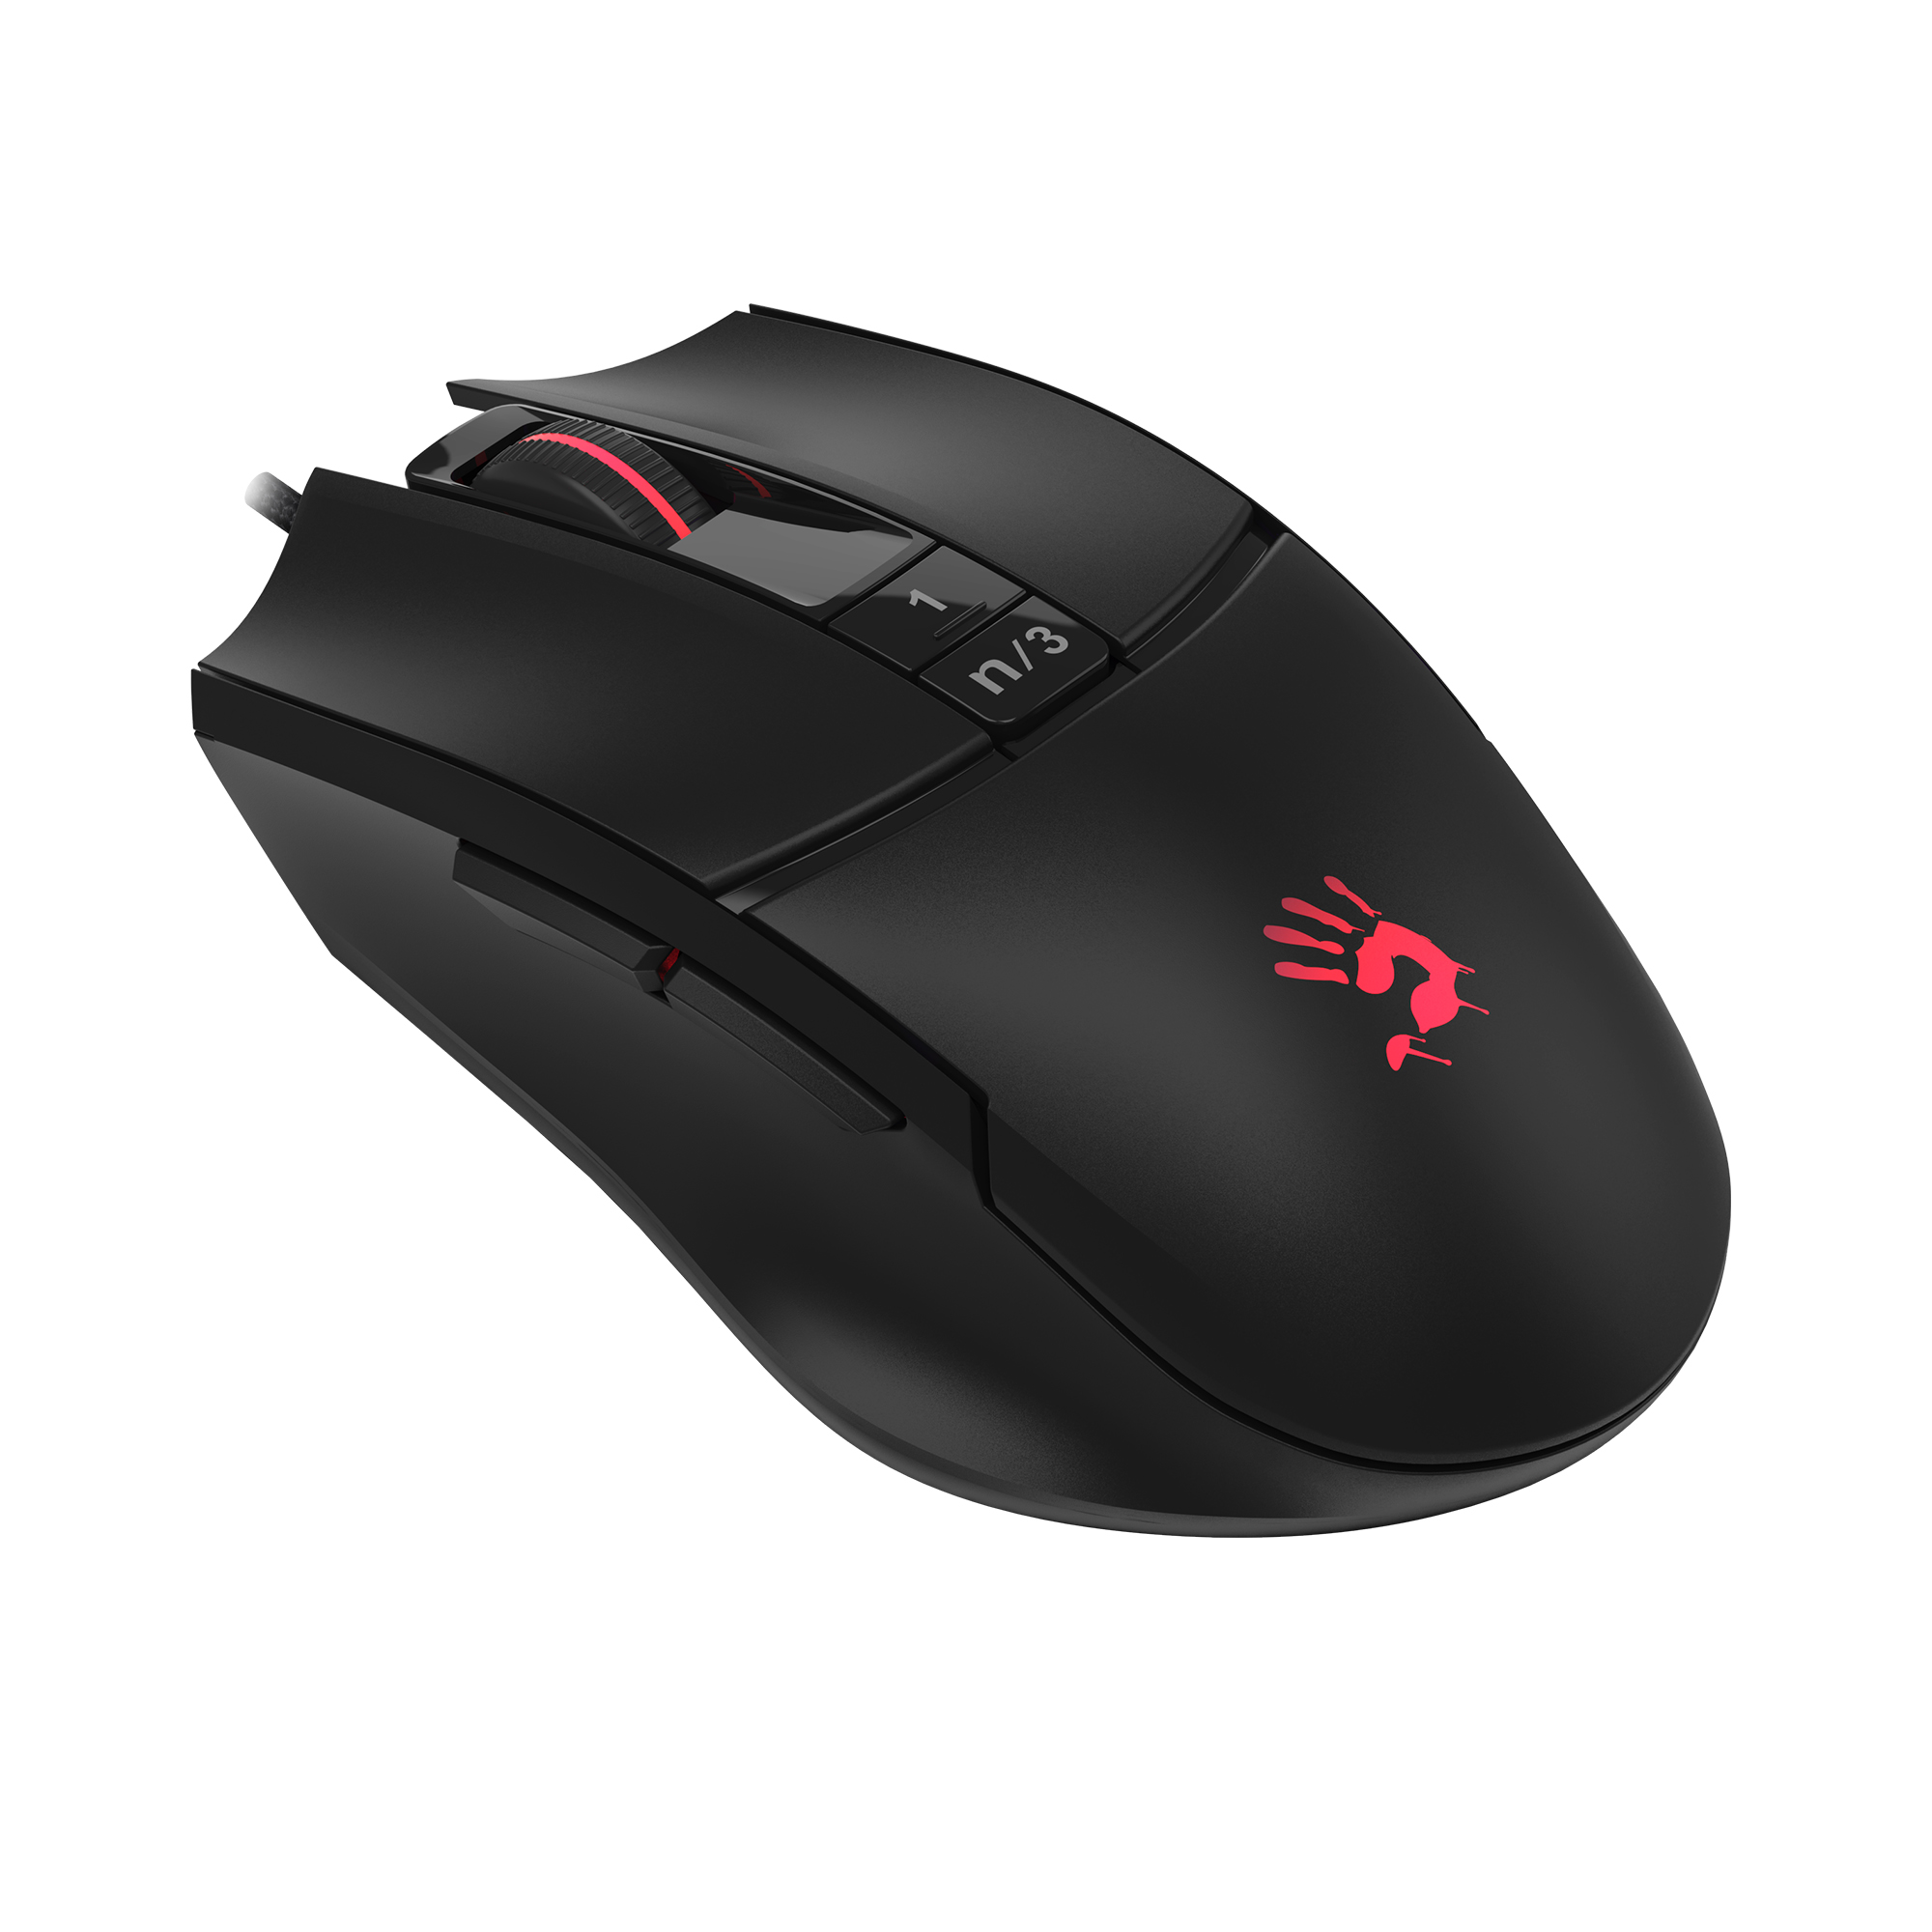 Blacklisted device bloody mouse a4tech rust решение фото 68